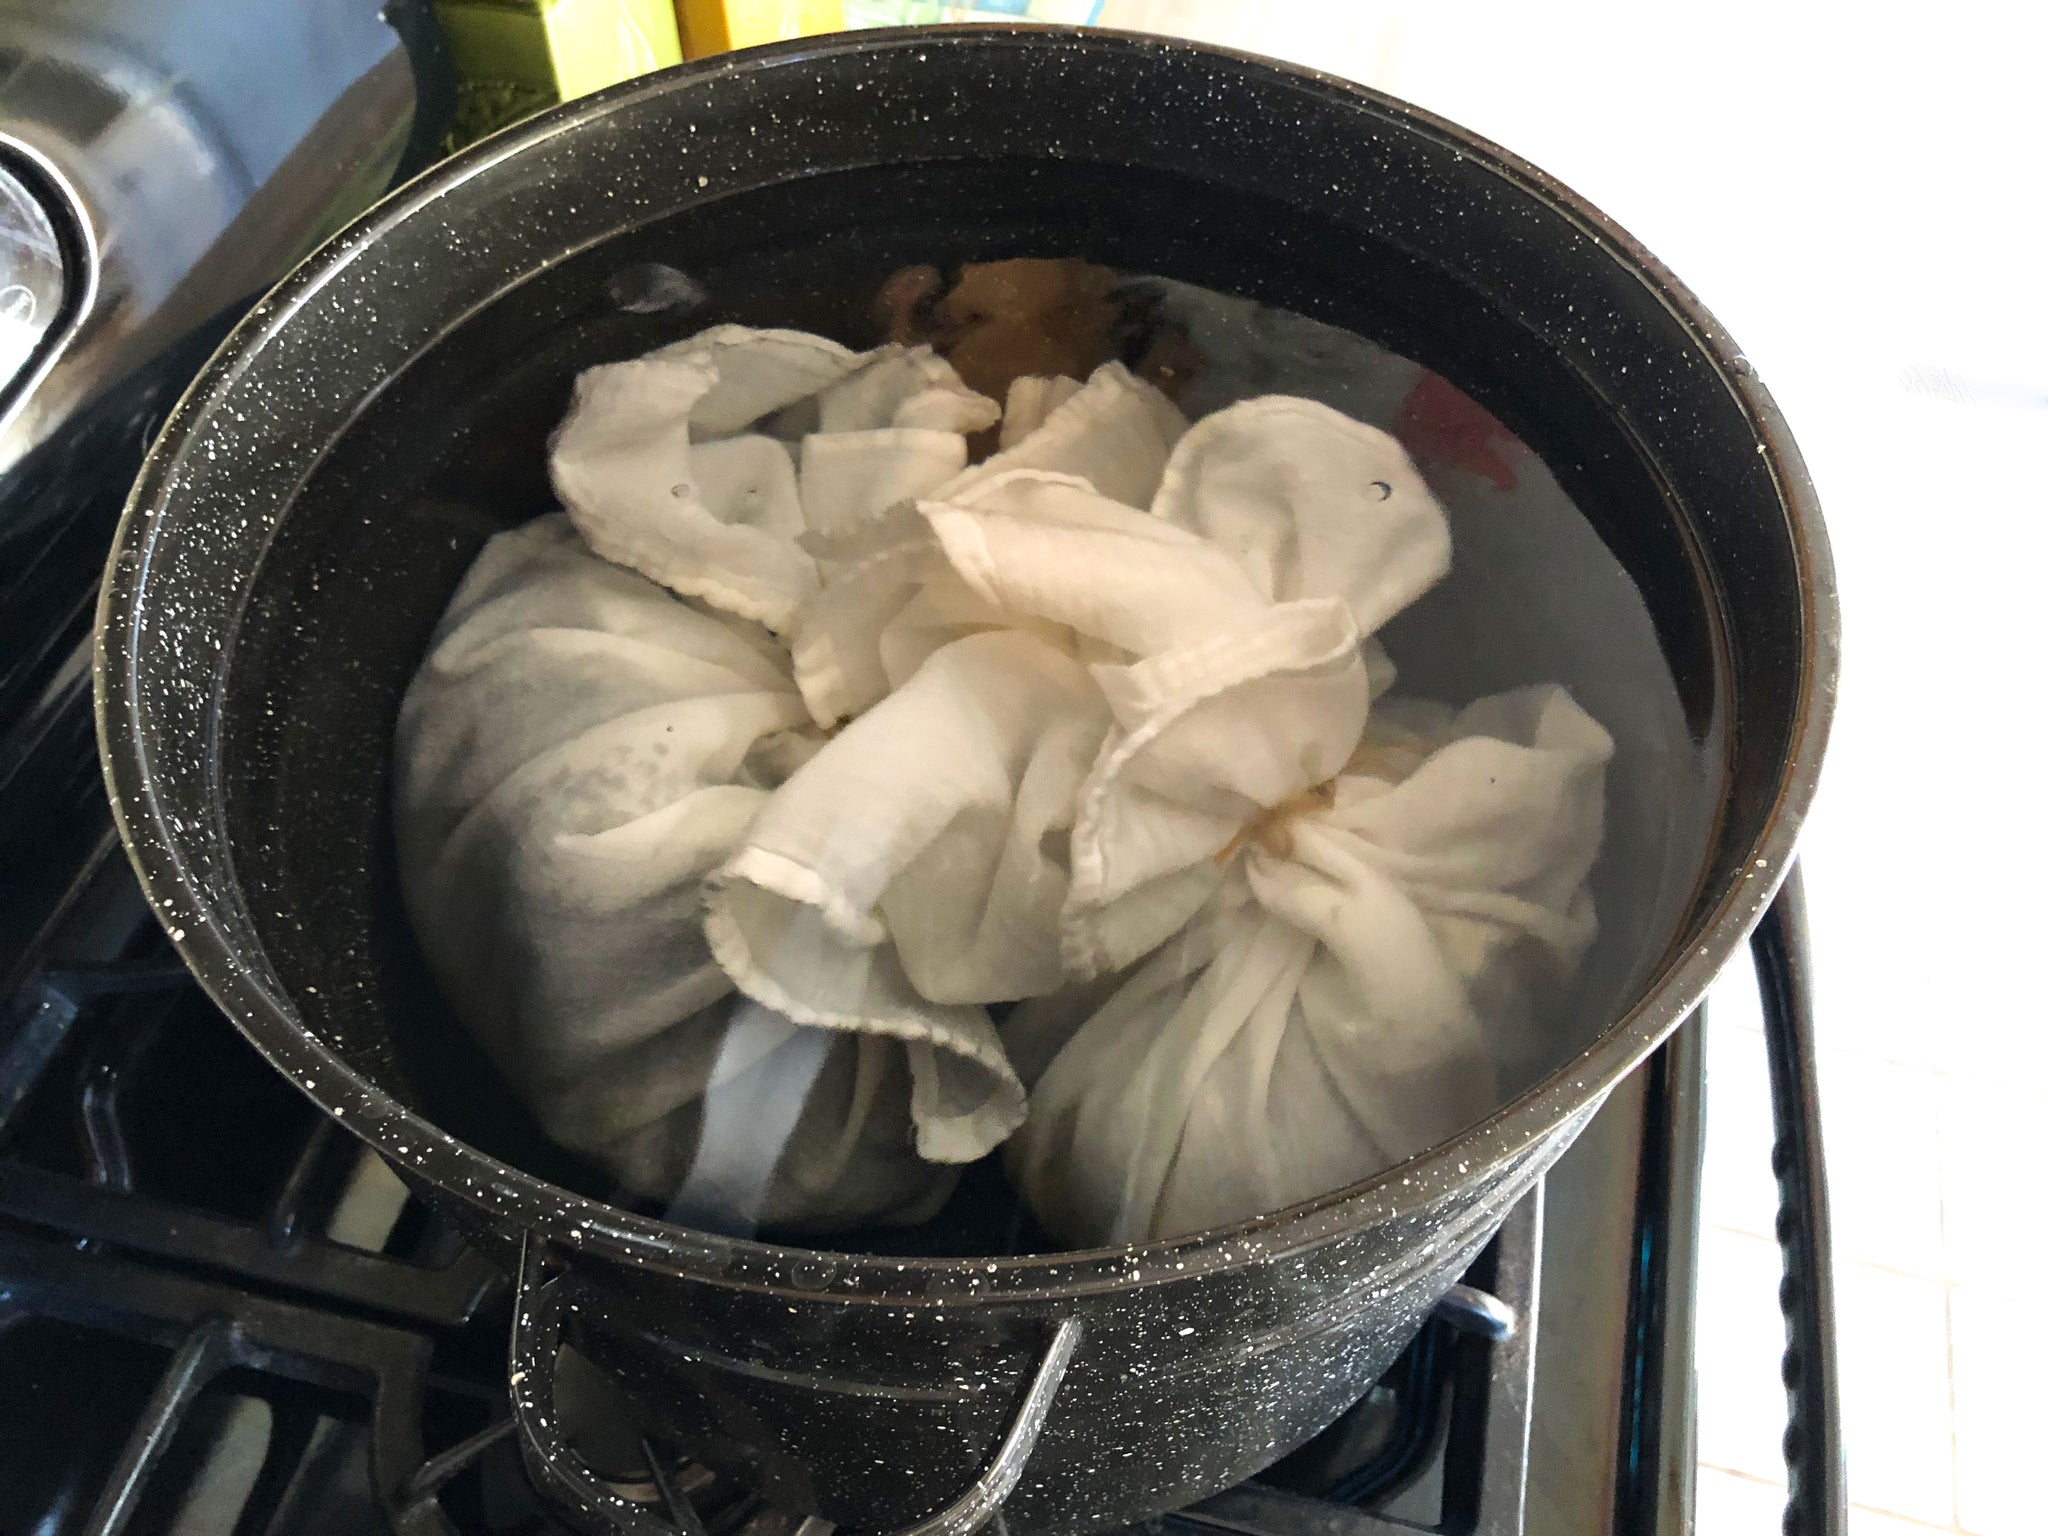 large tea bags in dyepot